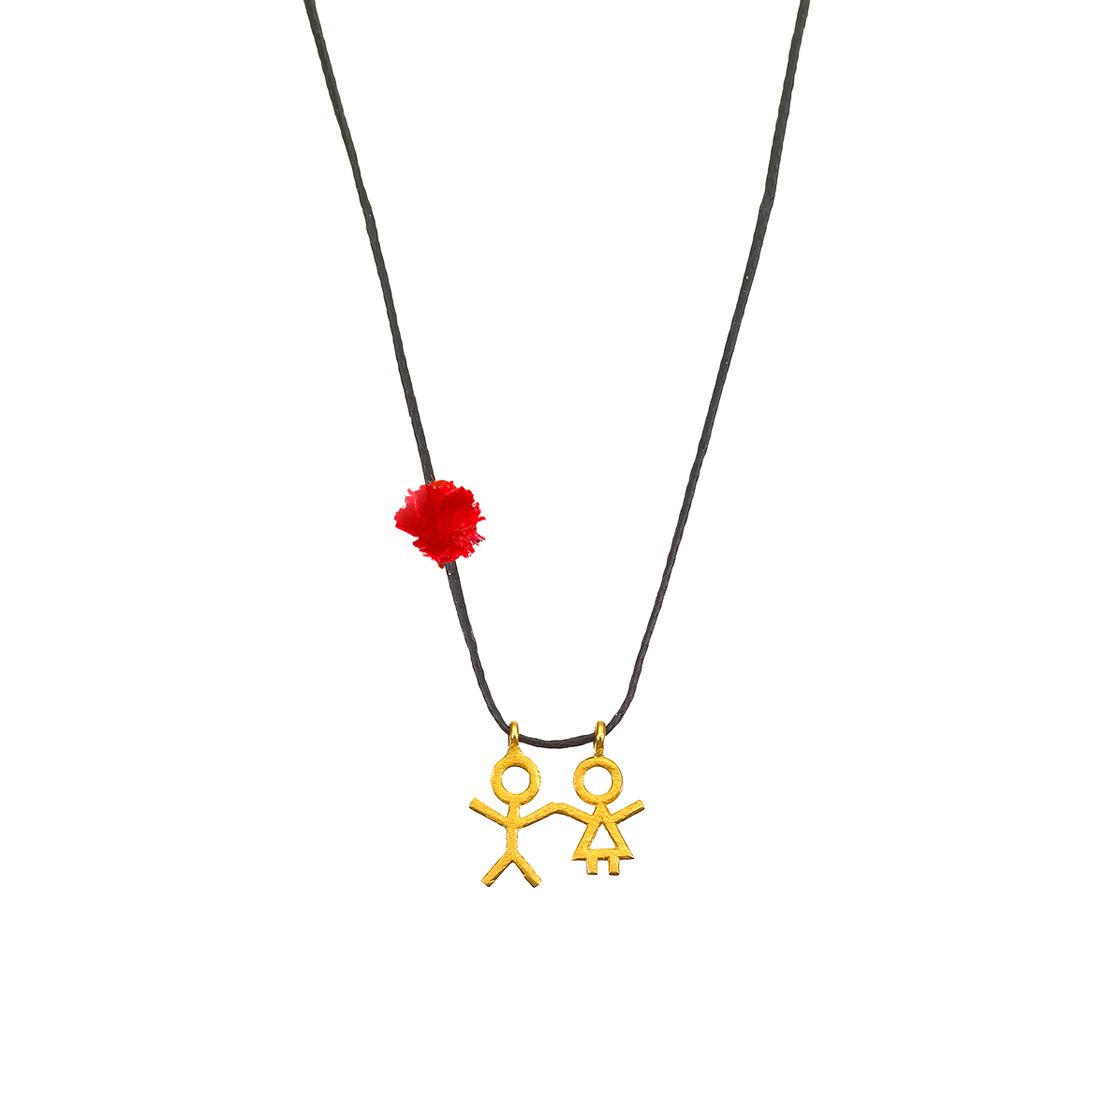 Gold boy holding a girl's hand charm with red tassle on black waxed cord.